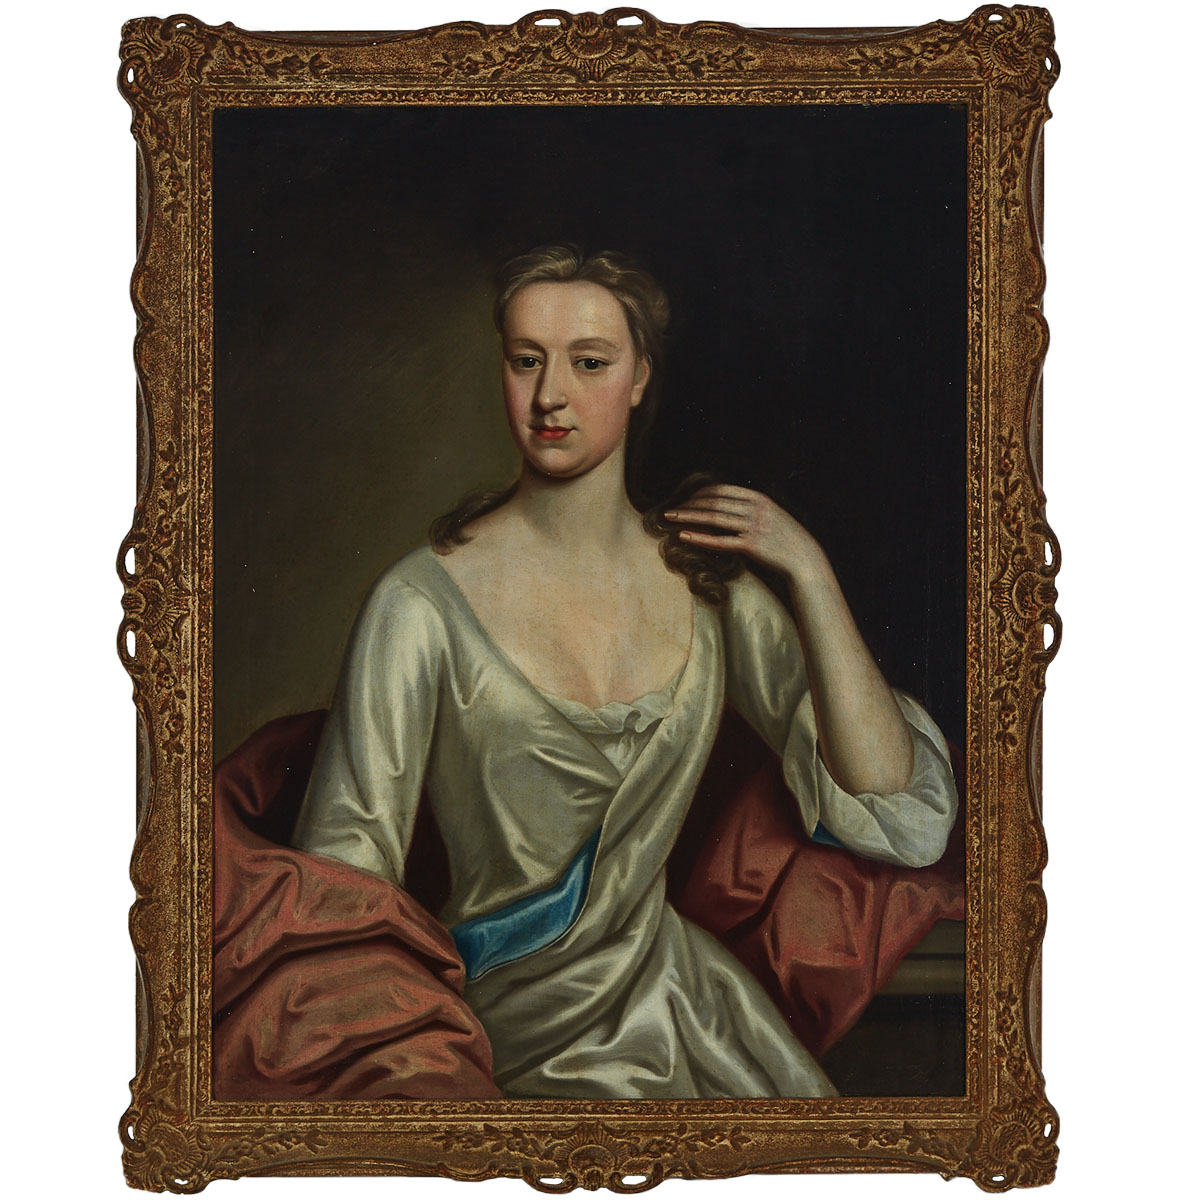 Attributed to Sir Godfrey Kneller (1646-1723)